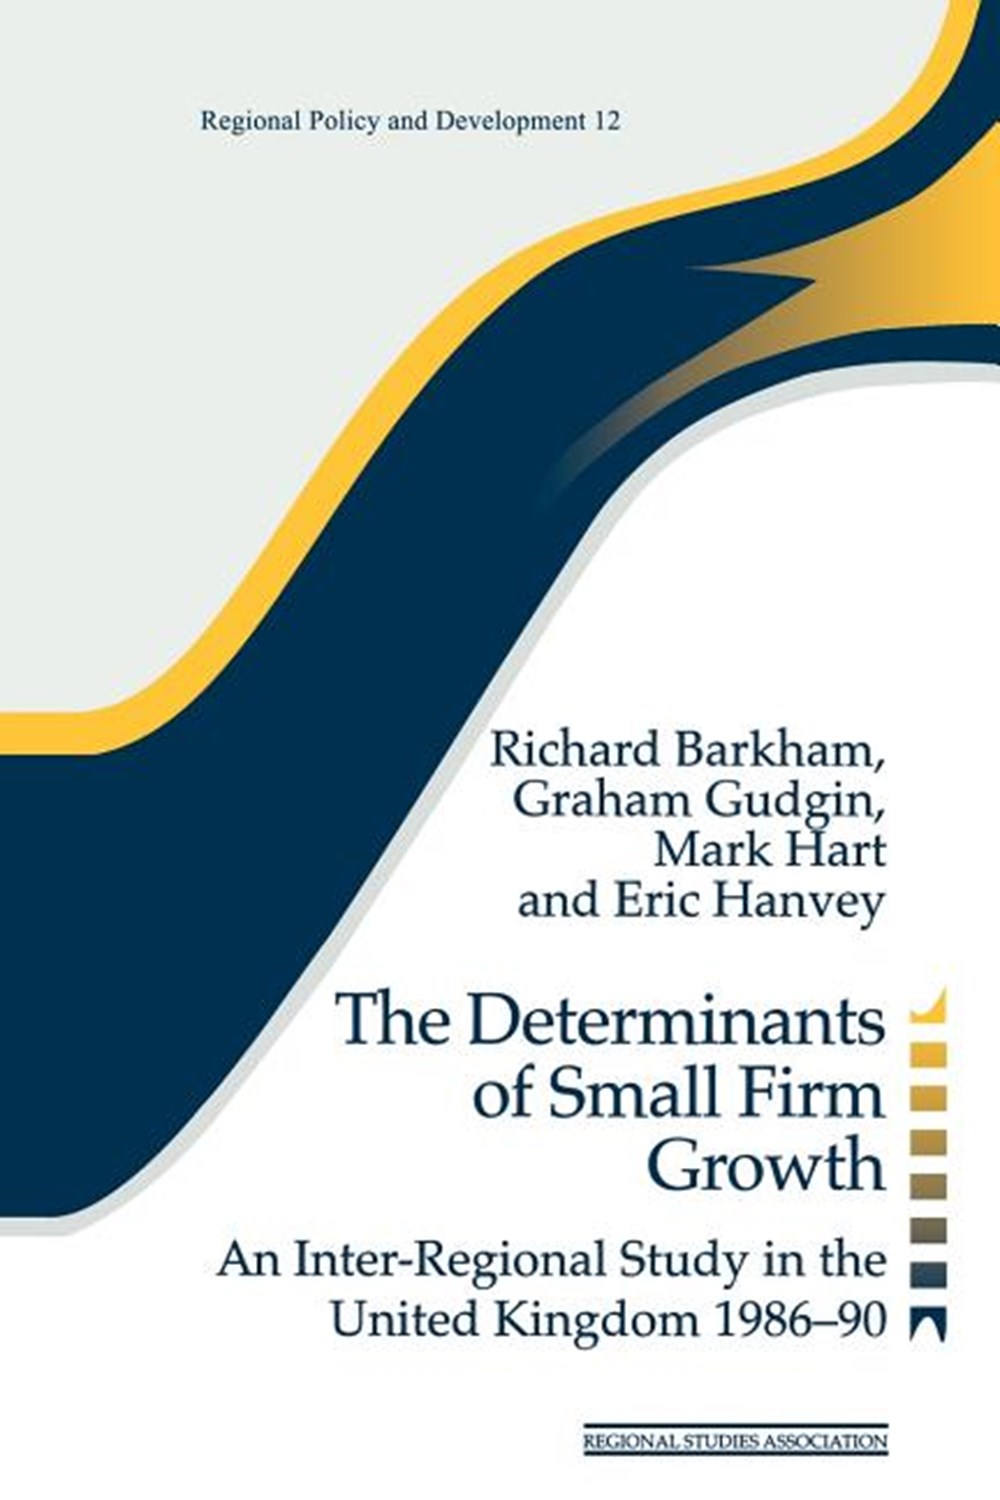 Determinants of Small Firm Growth: An Inter-Regional Study in the United Kingdom 1986-90 (Revised)